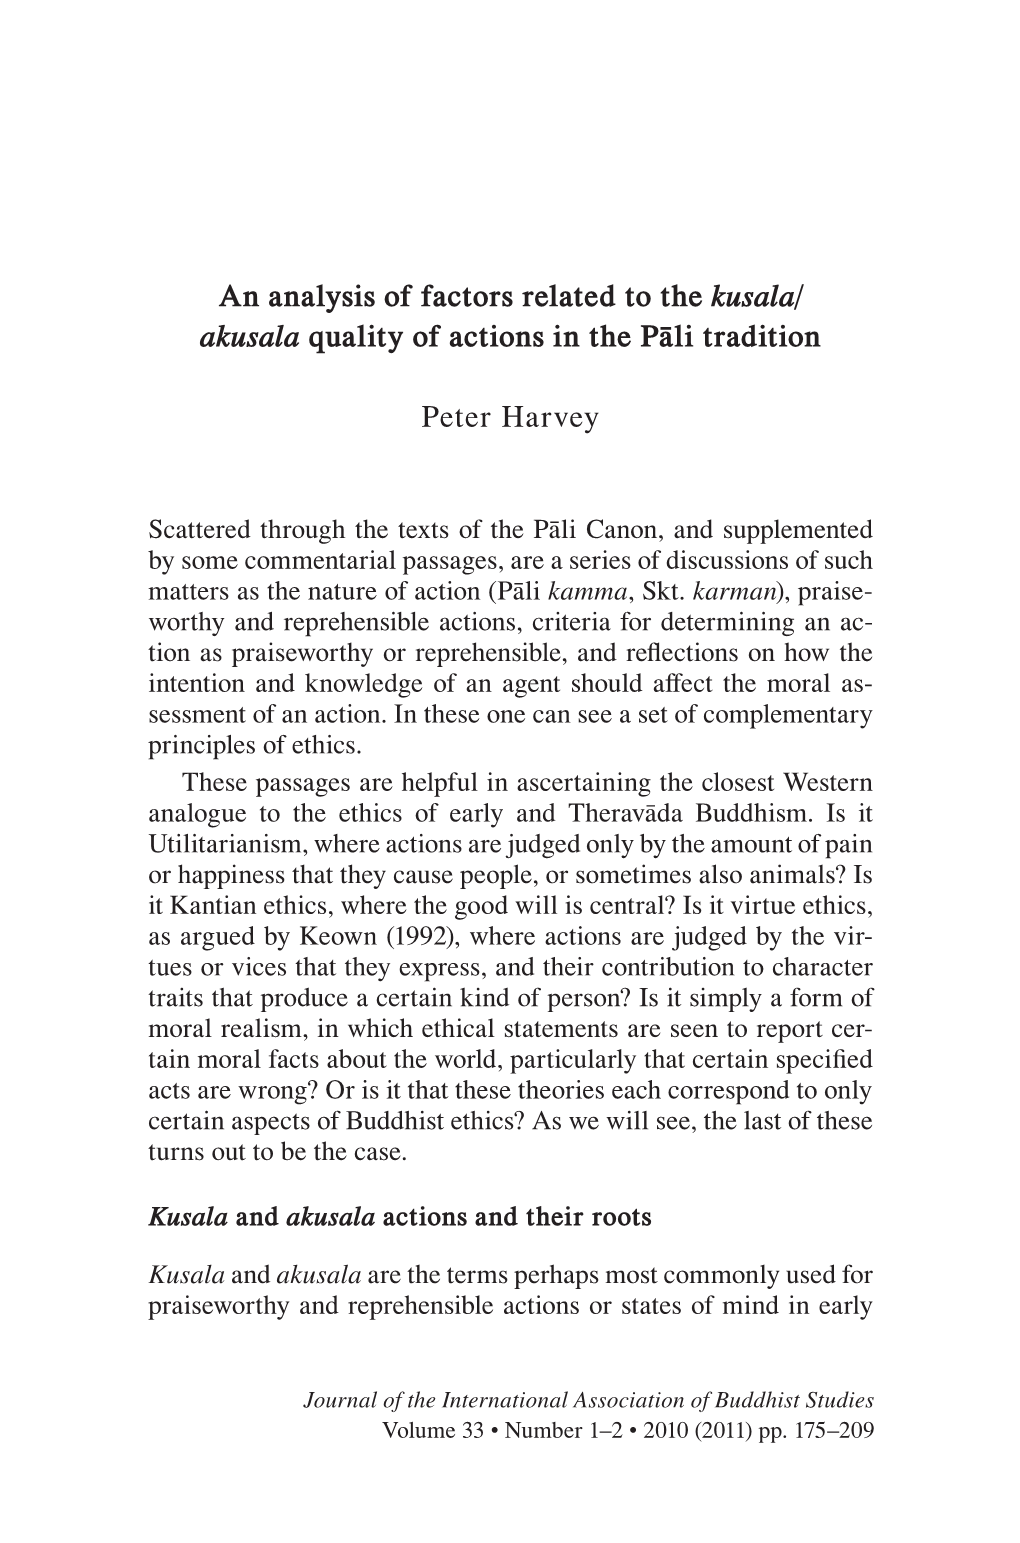 An Analysis of Factors Related to the Kusala/ Akusala Quality of Actions in the Pāli Tradition